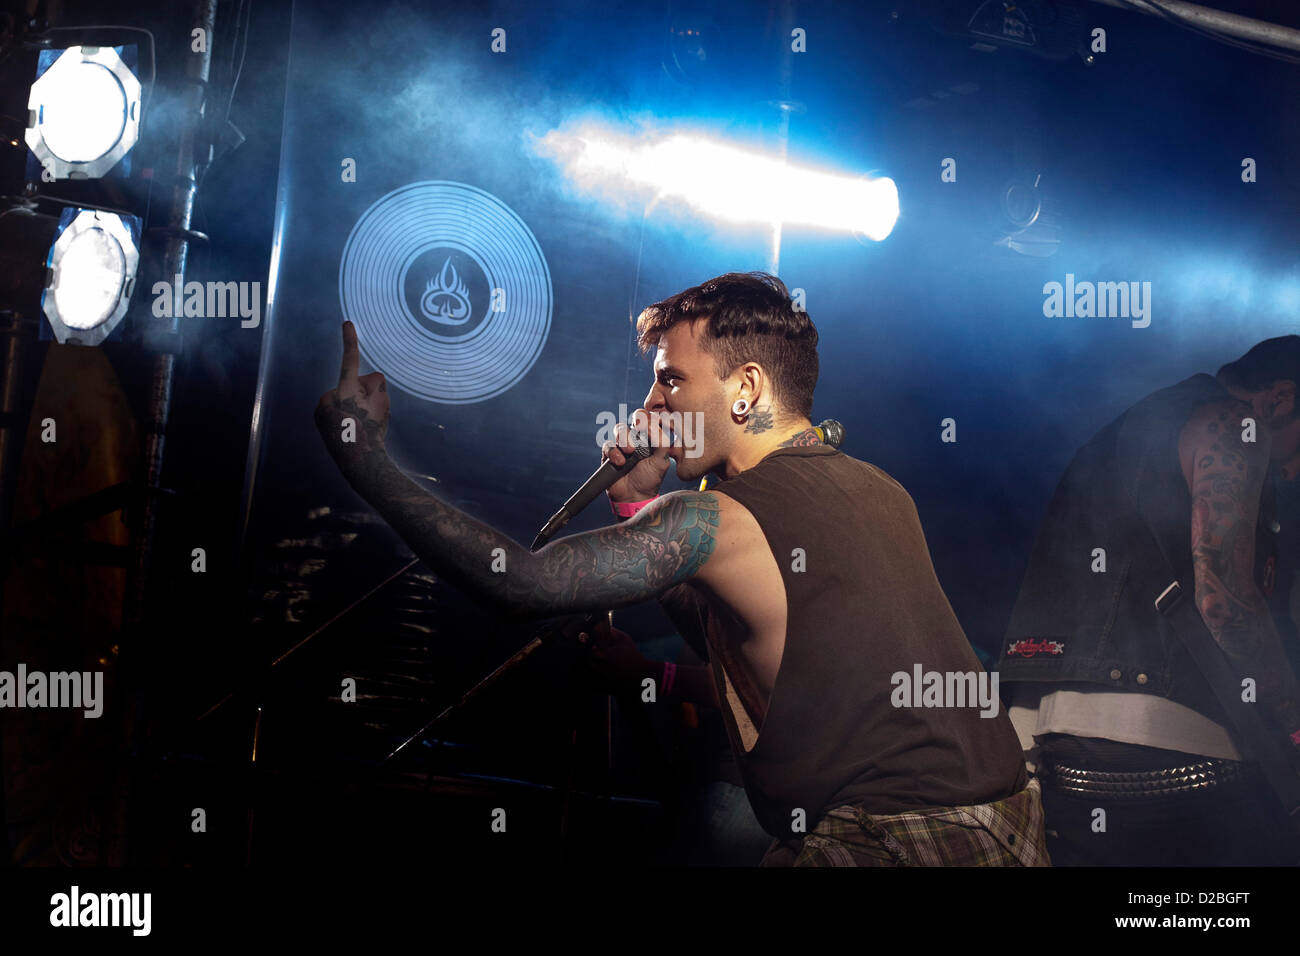 Jan 19, 2013 - Mar del Plata, Buenos Aires, Argentina - SERGIO MUNICH of Argentine punk rock band 'ROMA' performs live on stage at the Camaron Brujo 'Festival Poder Local' surf festival. (Credit Image: © Ryan Noble/ZUMAPRESS.com) Stock Photo